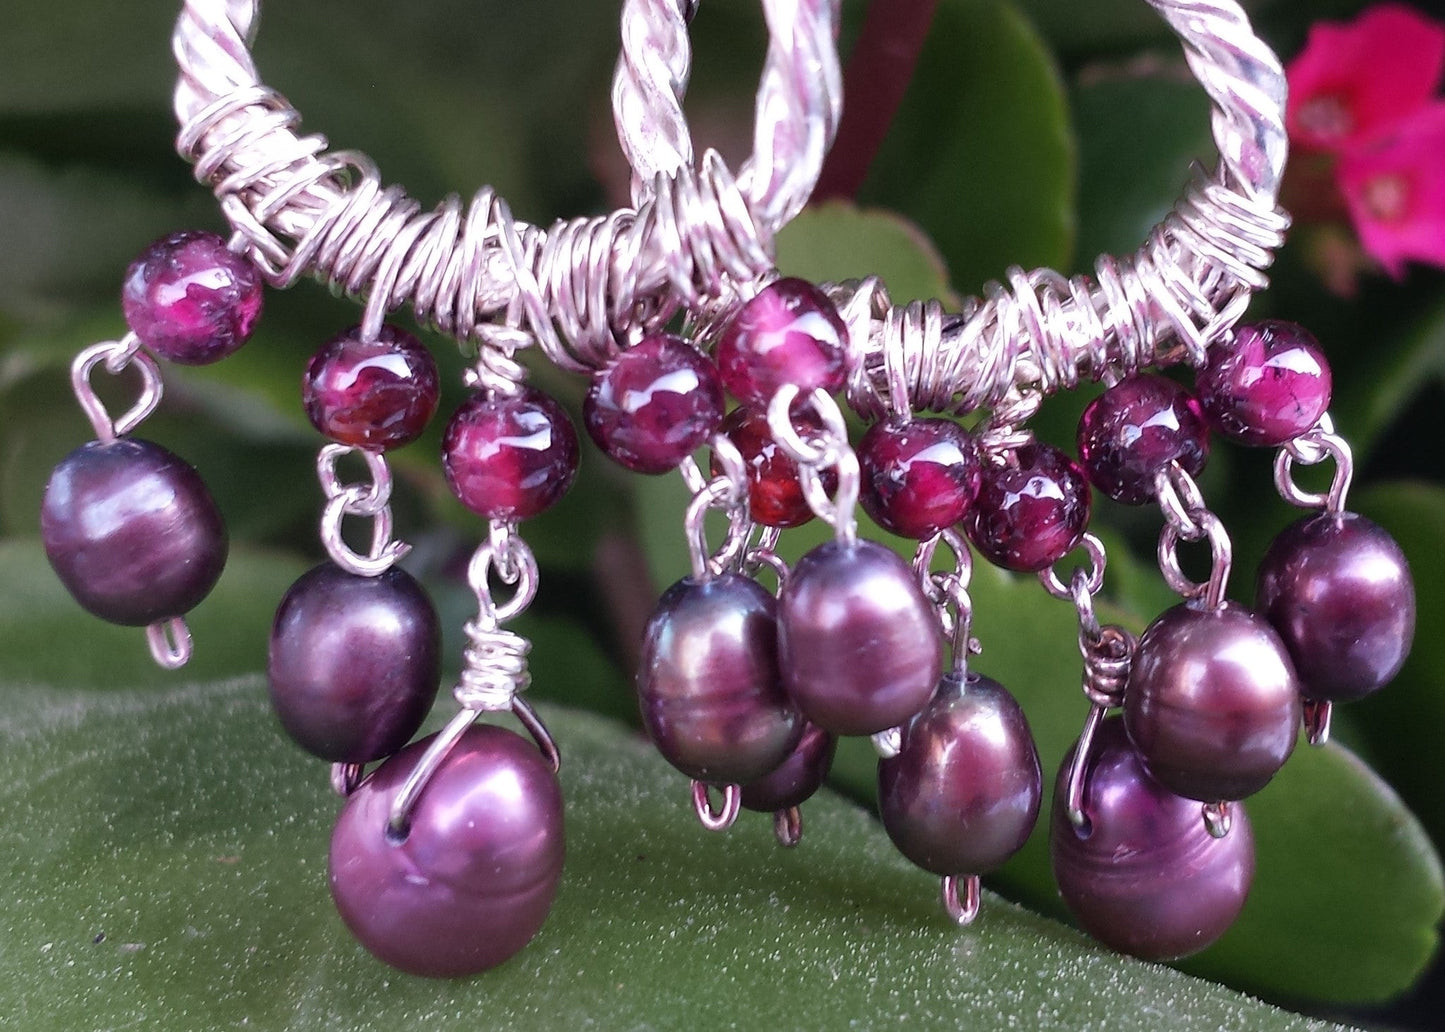 Long Garnet Pearl Chandlier Earrings, wire wrapped Sterling Silver, Garnets, and Freshwater Cultured Pearls.